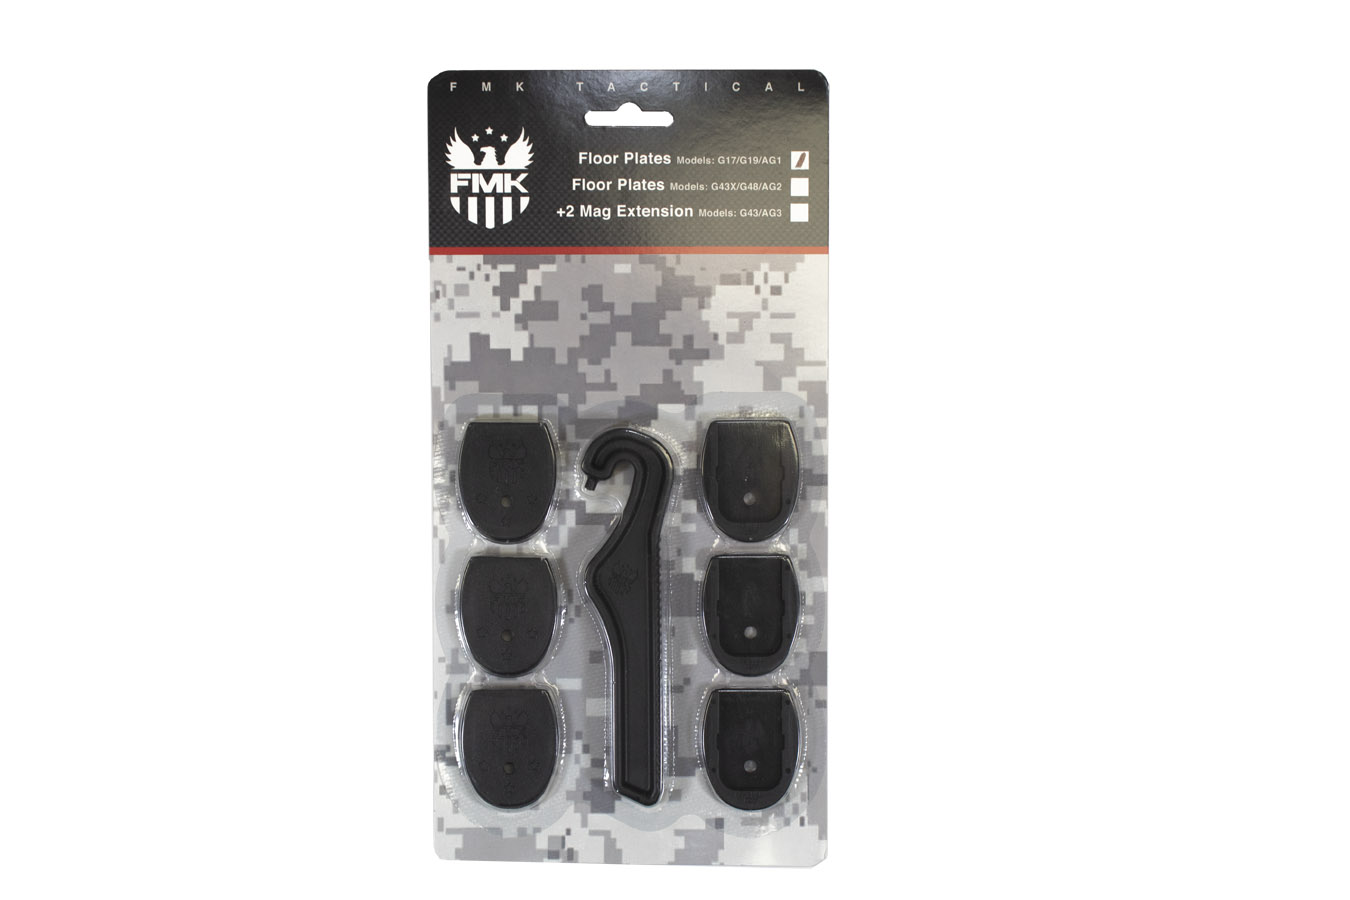 FMK AG-2 G17 G19  6 MAG FLOOR PLATES WITH TOOL